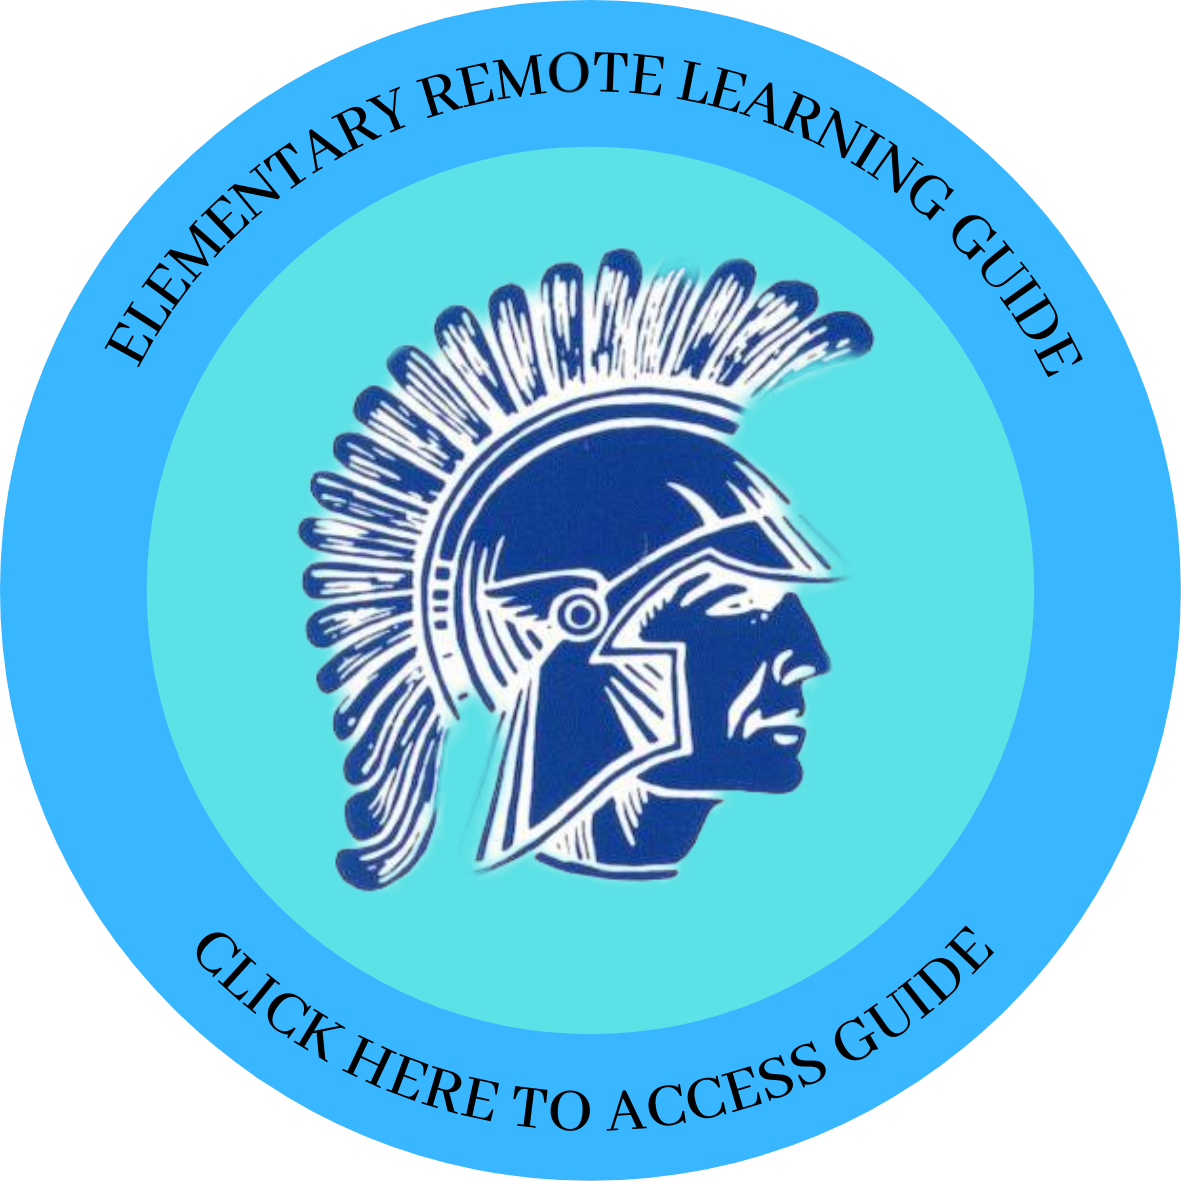 Elementary Remote Learning Guide